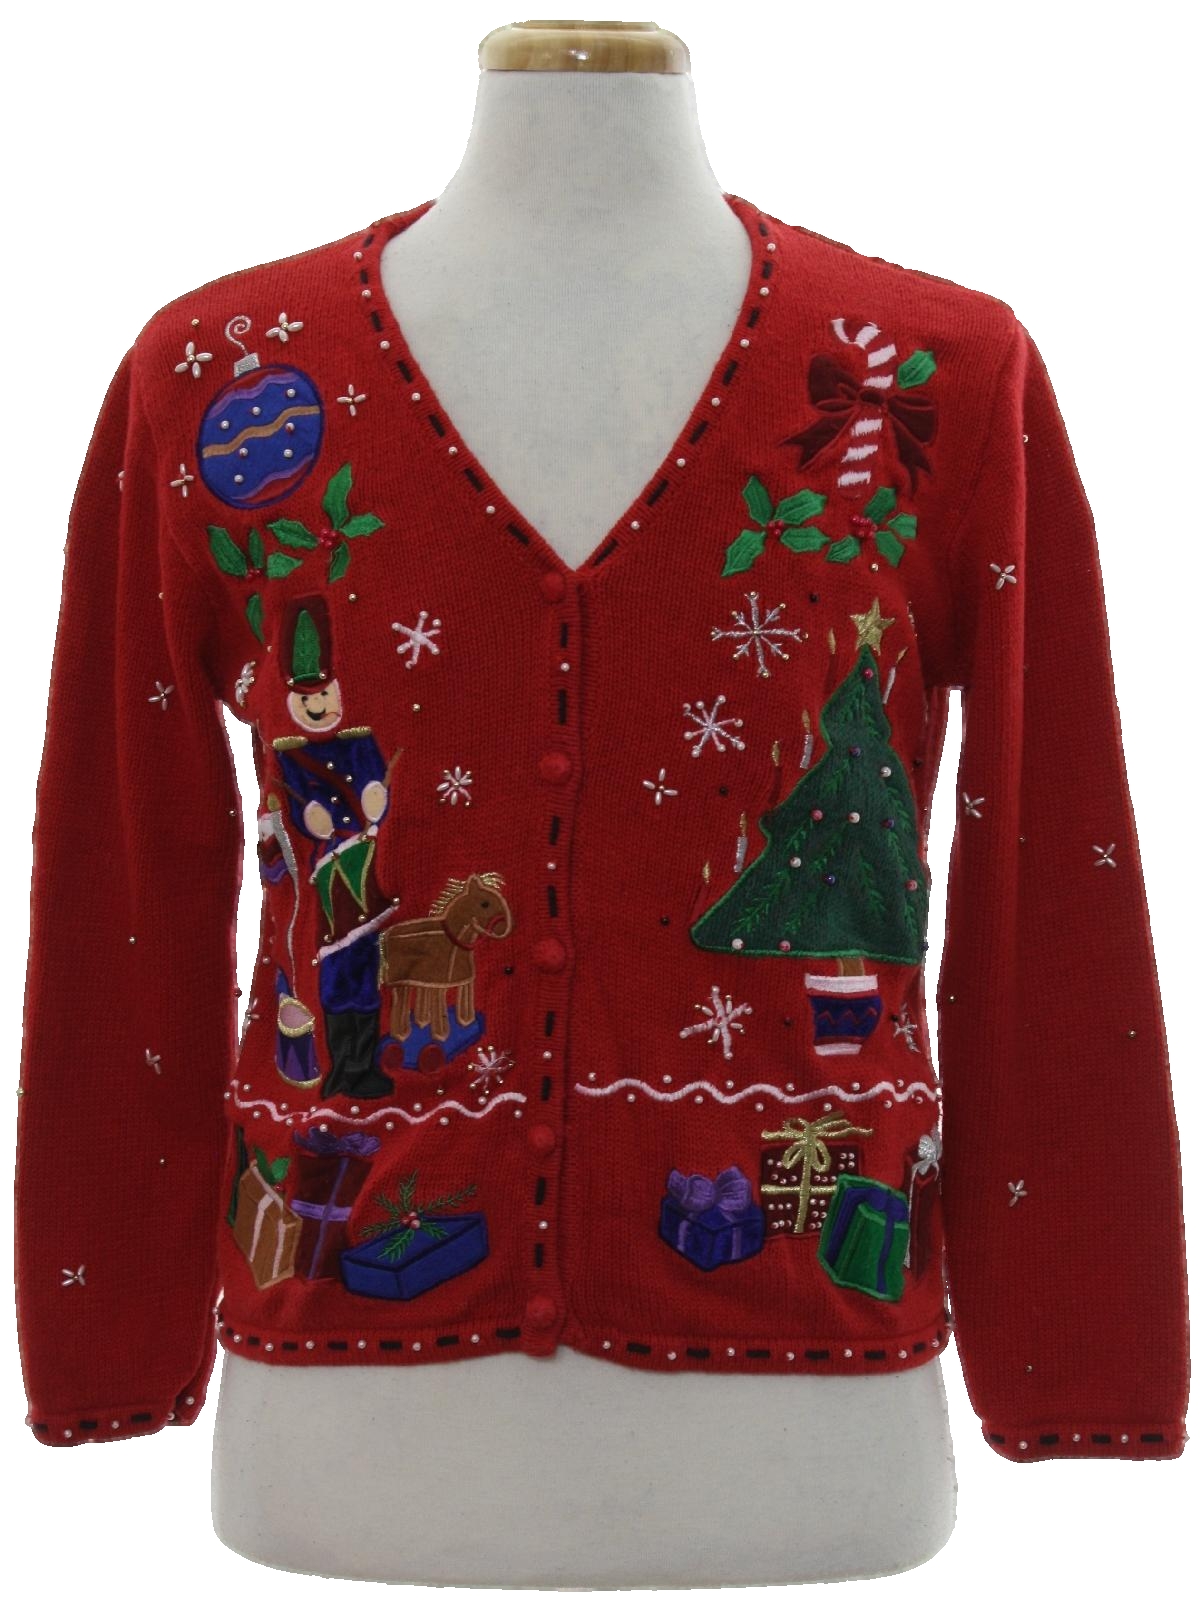 Womens Ugly Christmas Cardigan Sweater: -Studio- Womens red cotton ...